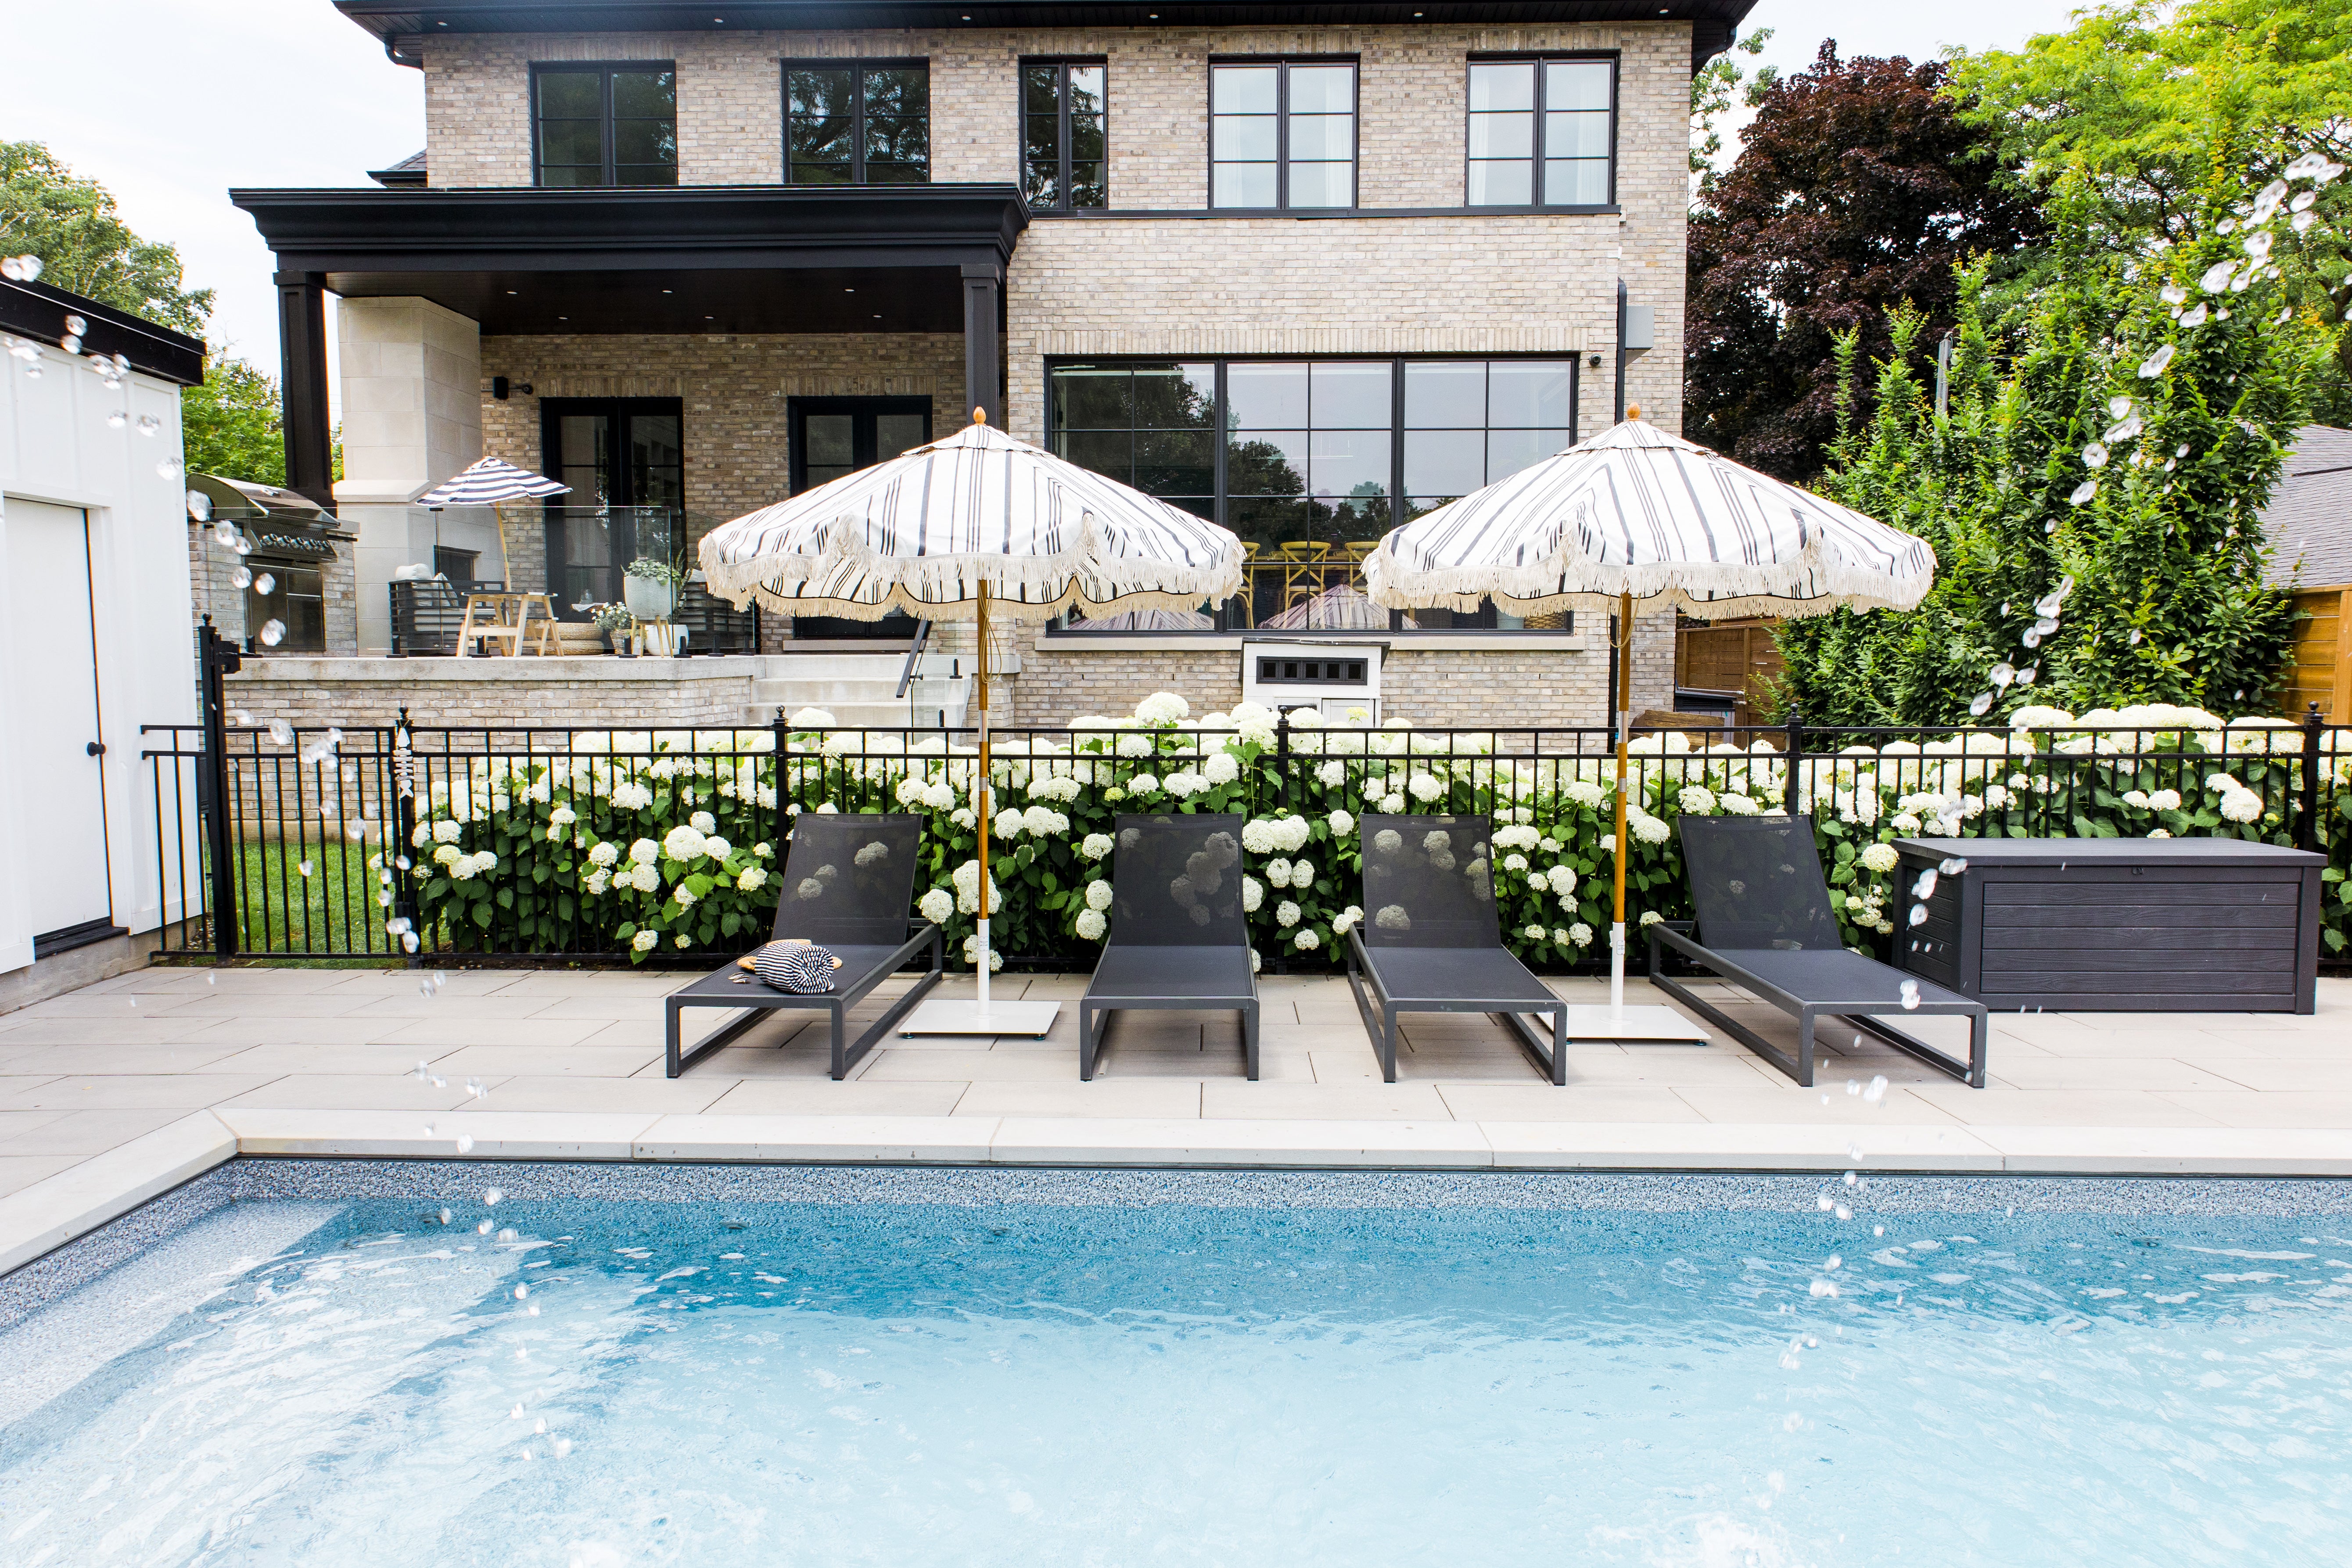 Pool with black loungers and striped umbrellas